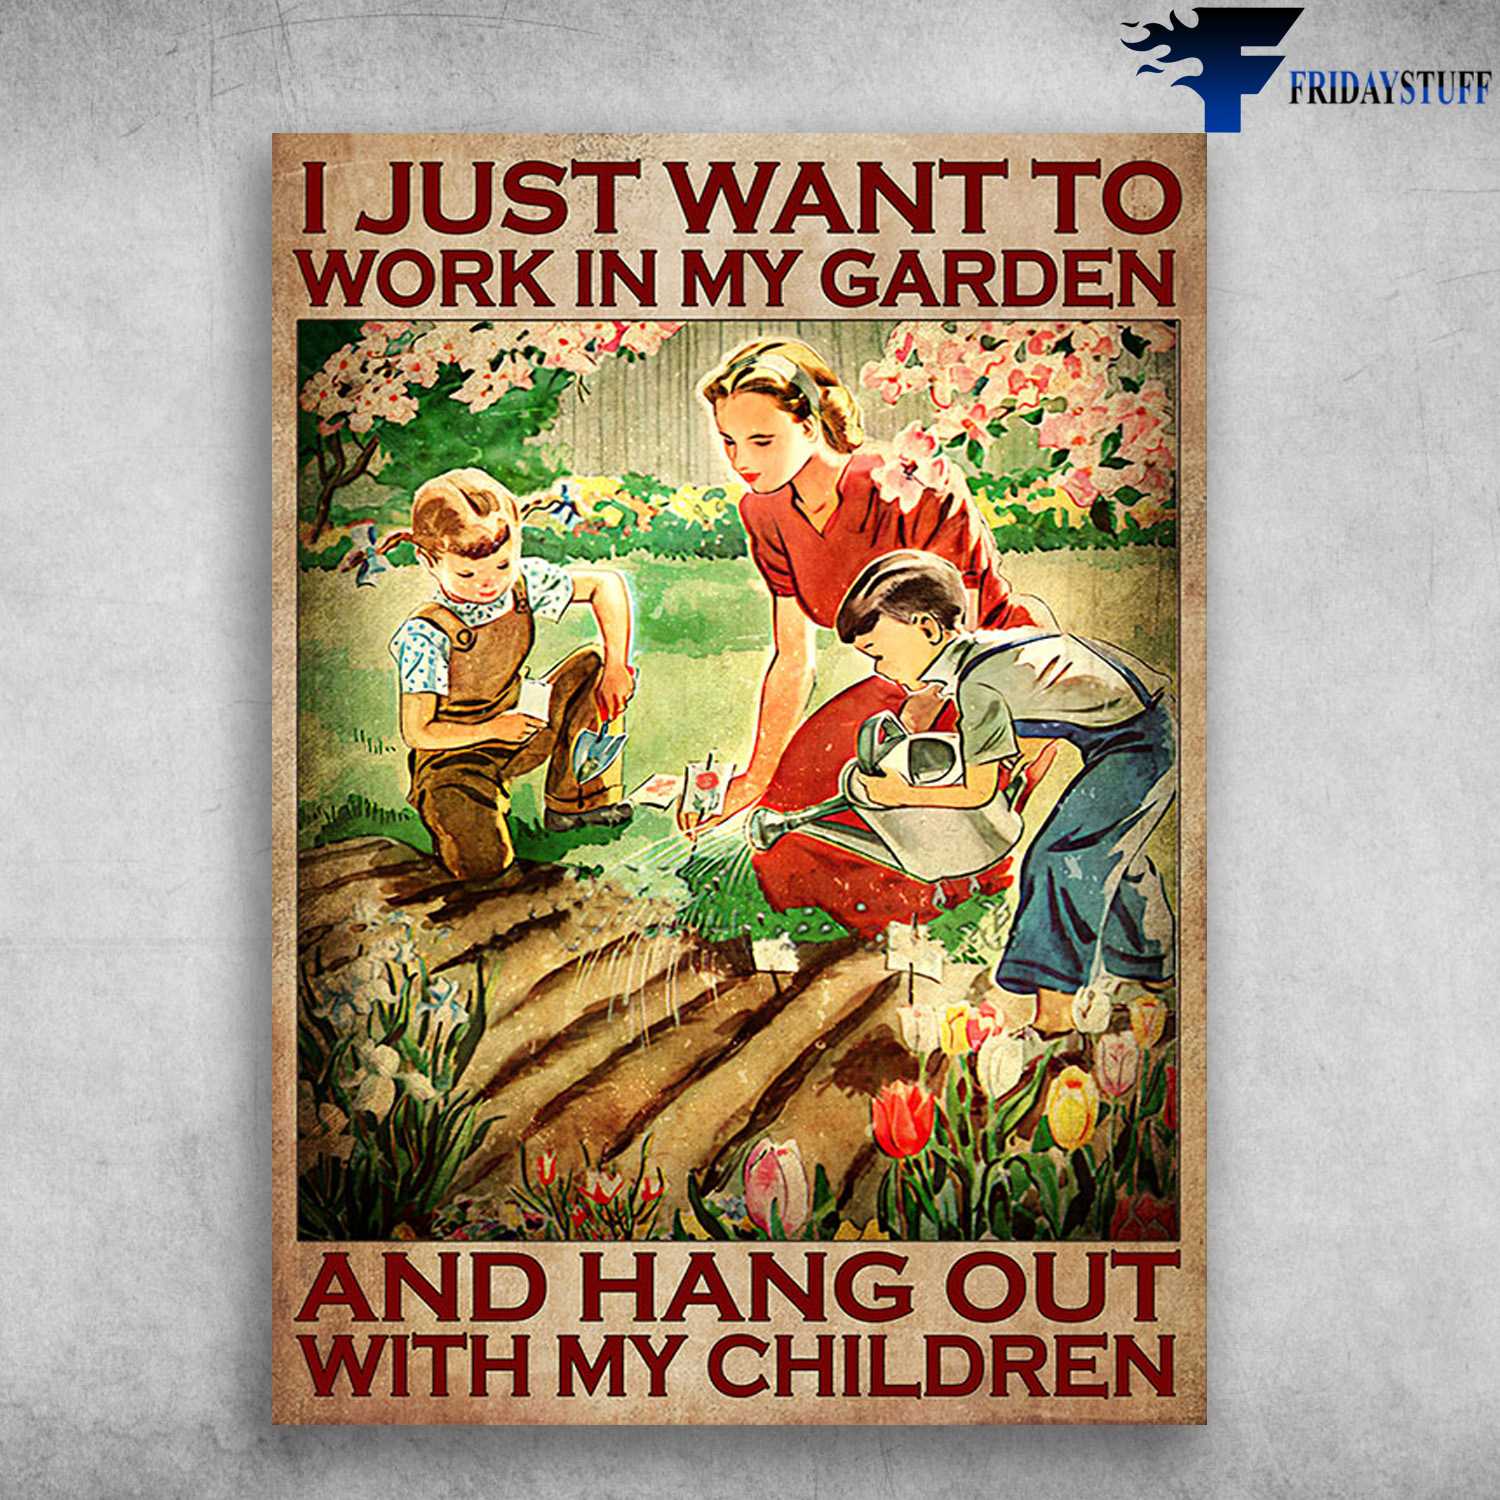 Mom And Sons Garden - Just Want To Work In My Garden, And Hang Out With My Children